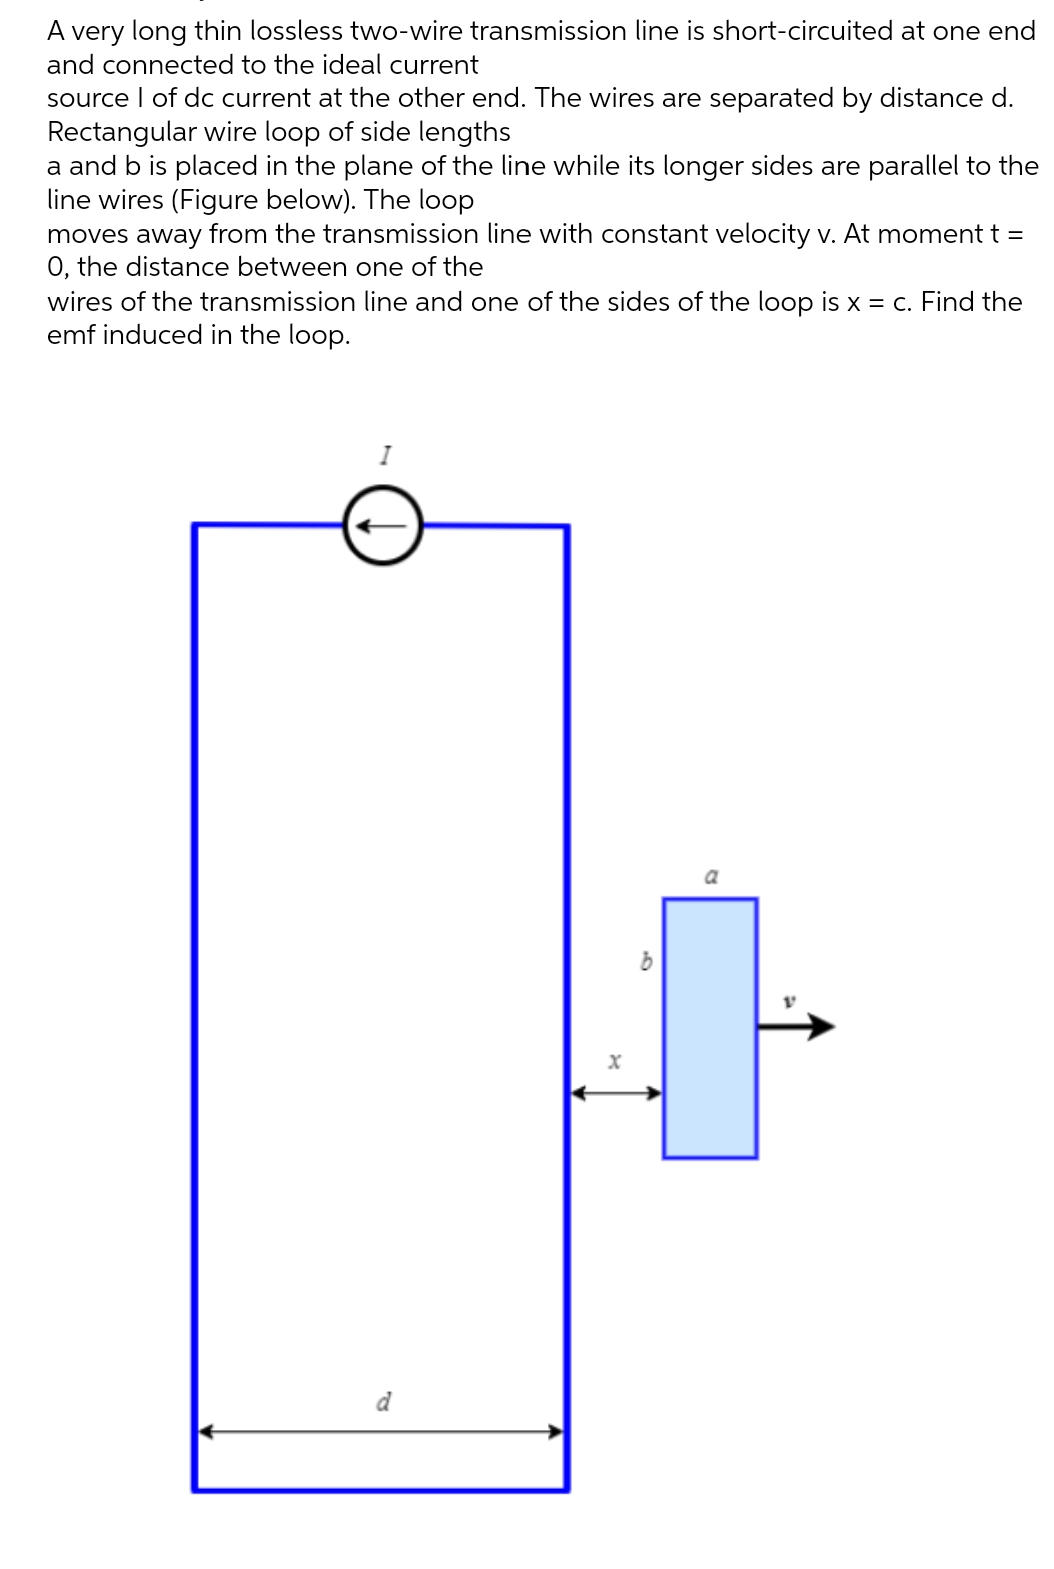 A very long thin lossless two-wire transmission line is short-circuited at one end
and connected to the ideal current
source I of dc current at the other end. The wires are separated by distance d.
Rectangular wire loop of side lengths
a and b is placed in the plane of the line while its longer sides are parallel to the
line wires (Figure below). The loop
moves away from the transmission line with constant velocity v. At moment t =
O, the distance between one of the
wires of the transmission line and one of the sides of the loop is x = c. Find the
emf induced in the loop.
I
d
X
1